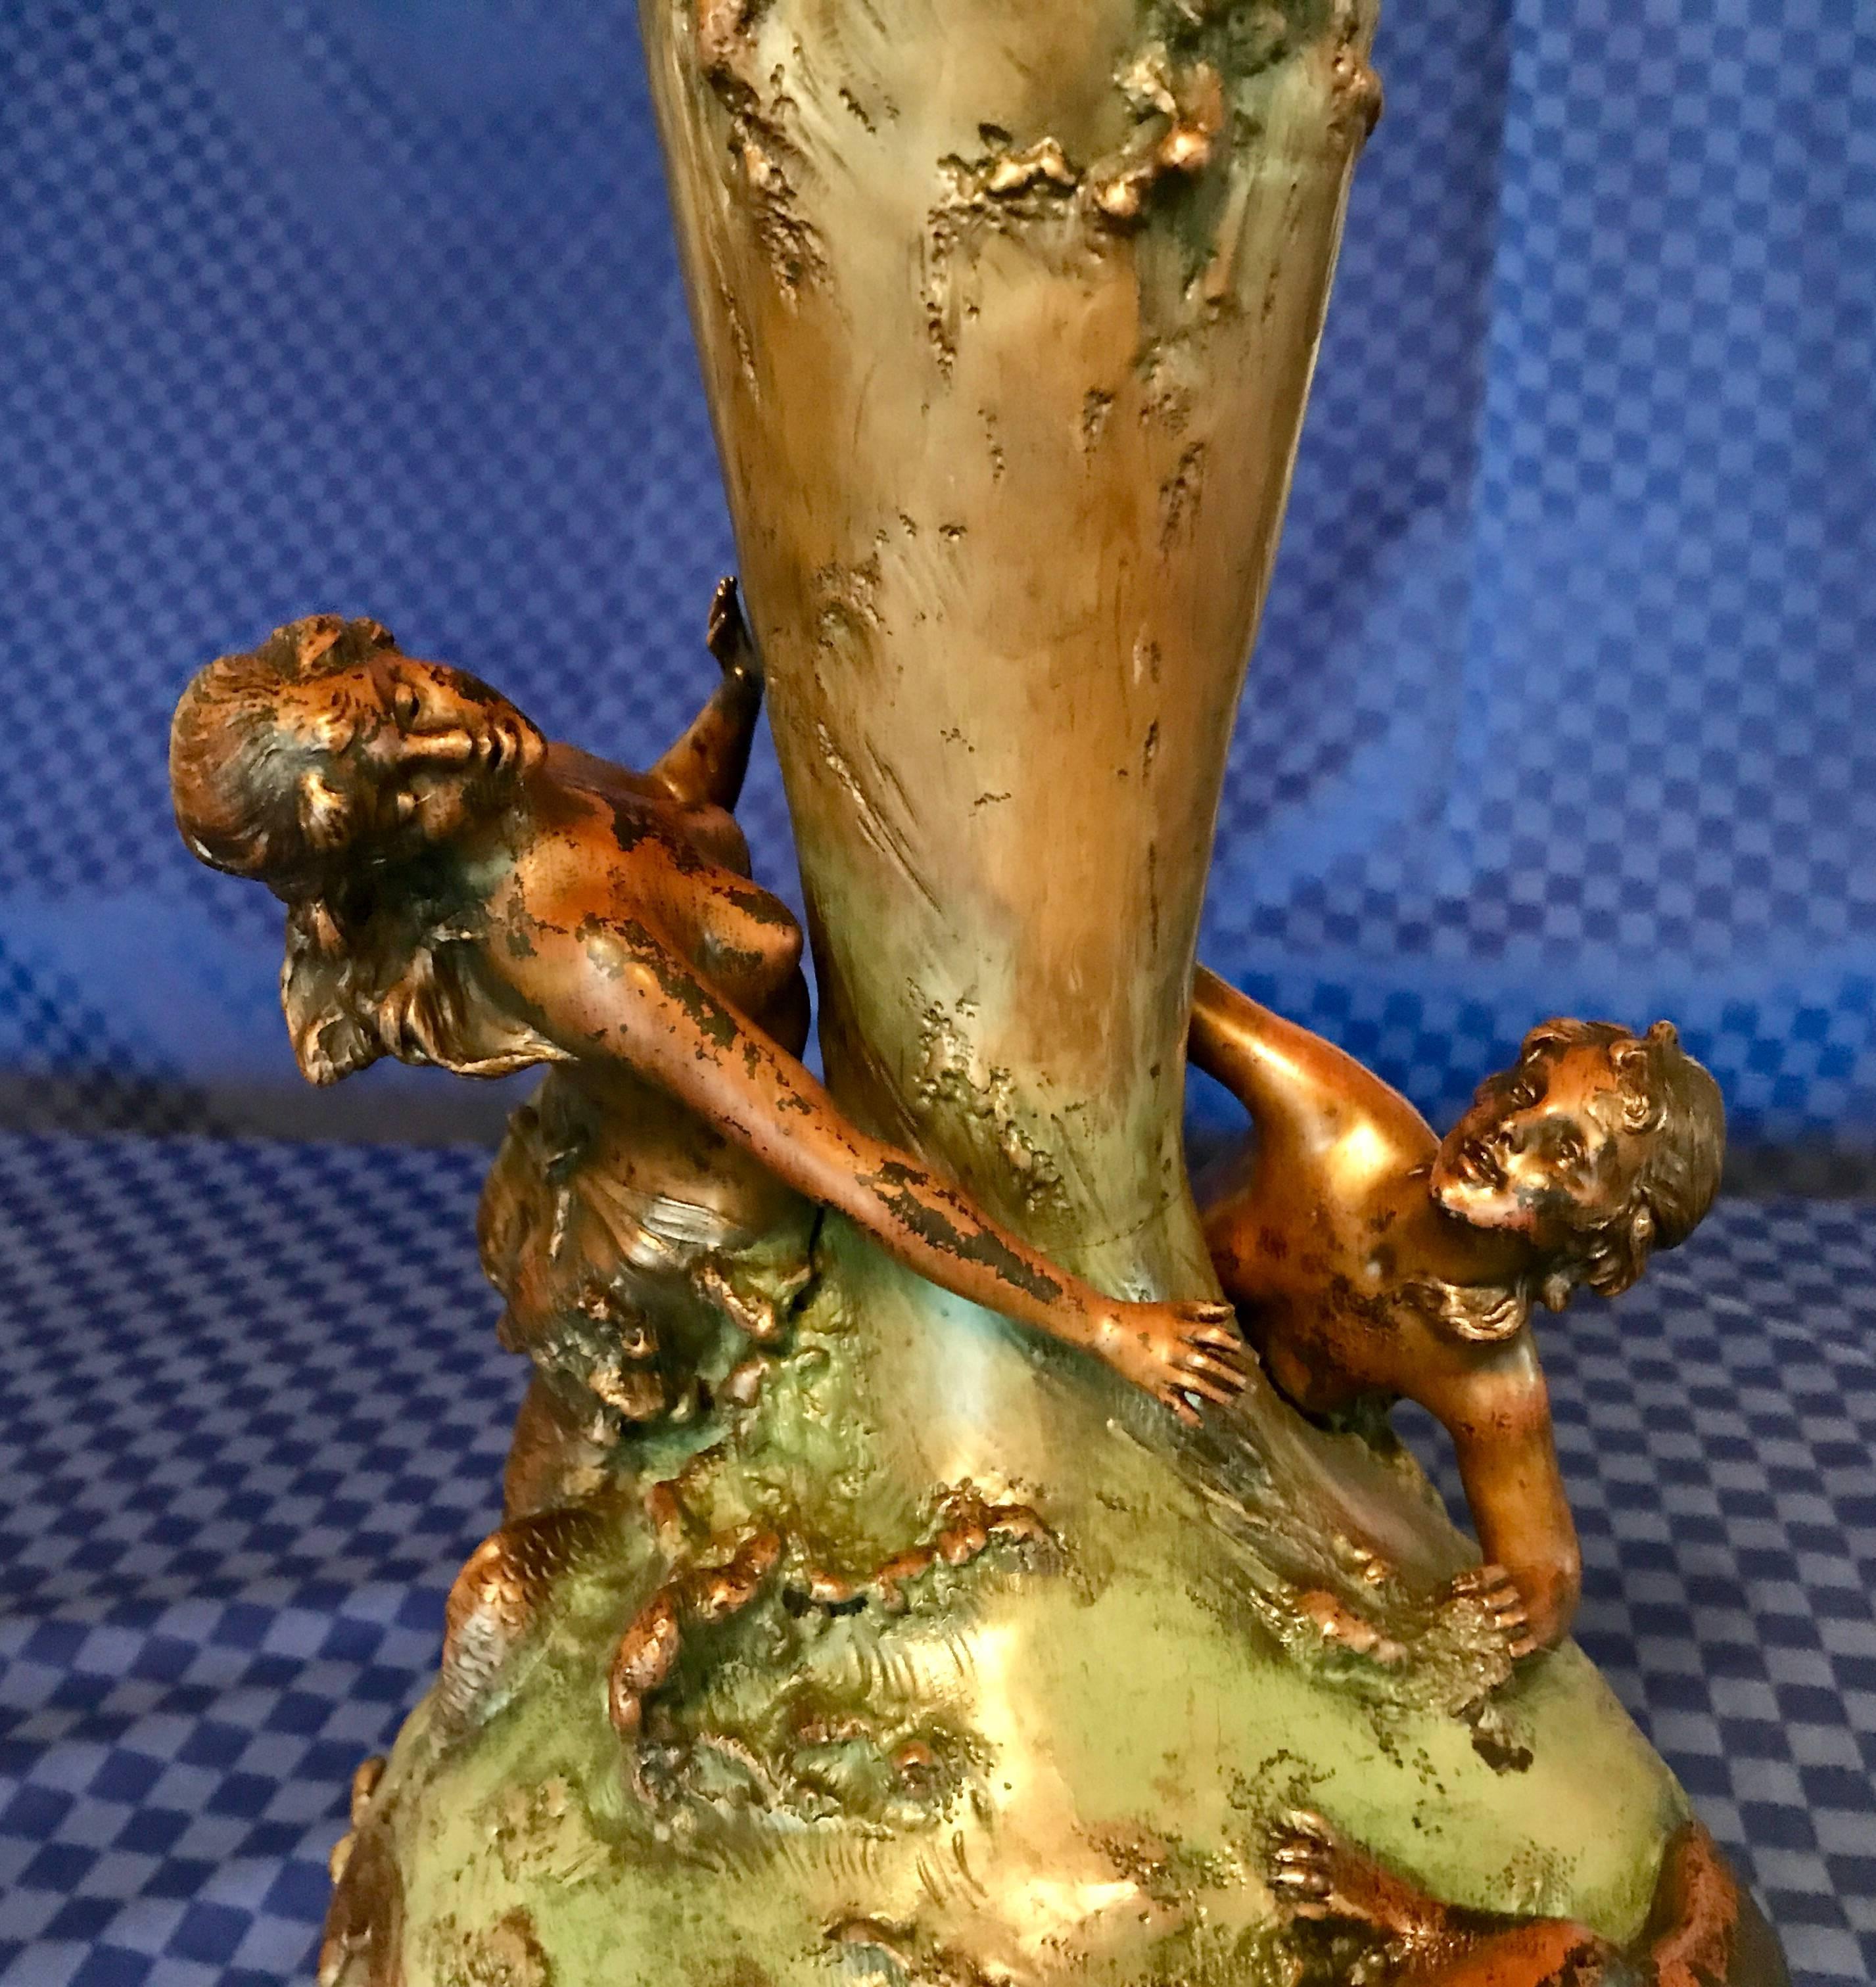 Impressive bronze vase with three-dimensional mermaid decoration, signed by Ignaz Mansch (Austrian 1867-1925). The vase will be directly shipped from Germany. The shipping costs to Boston are included.